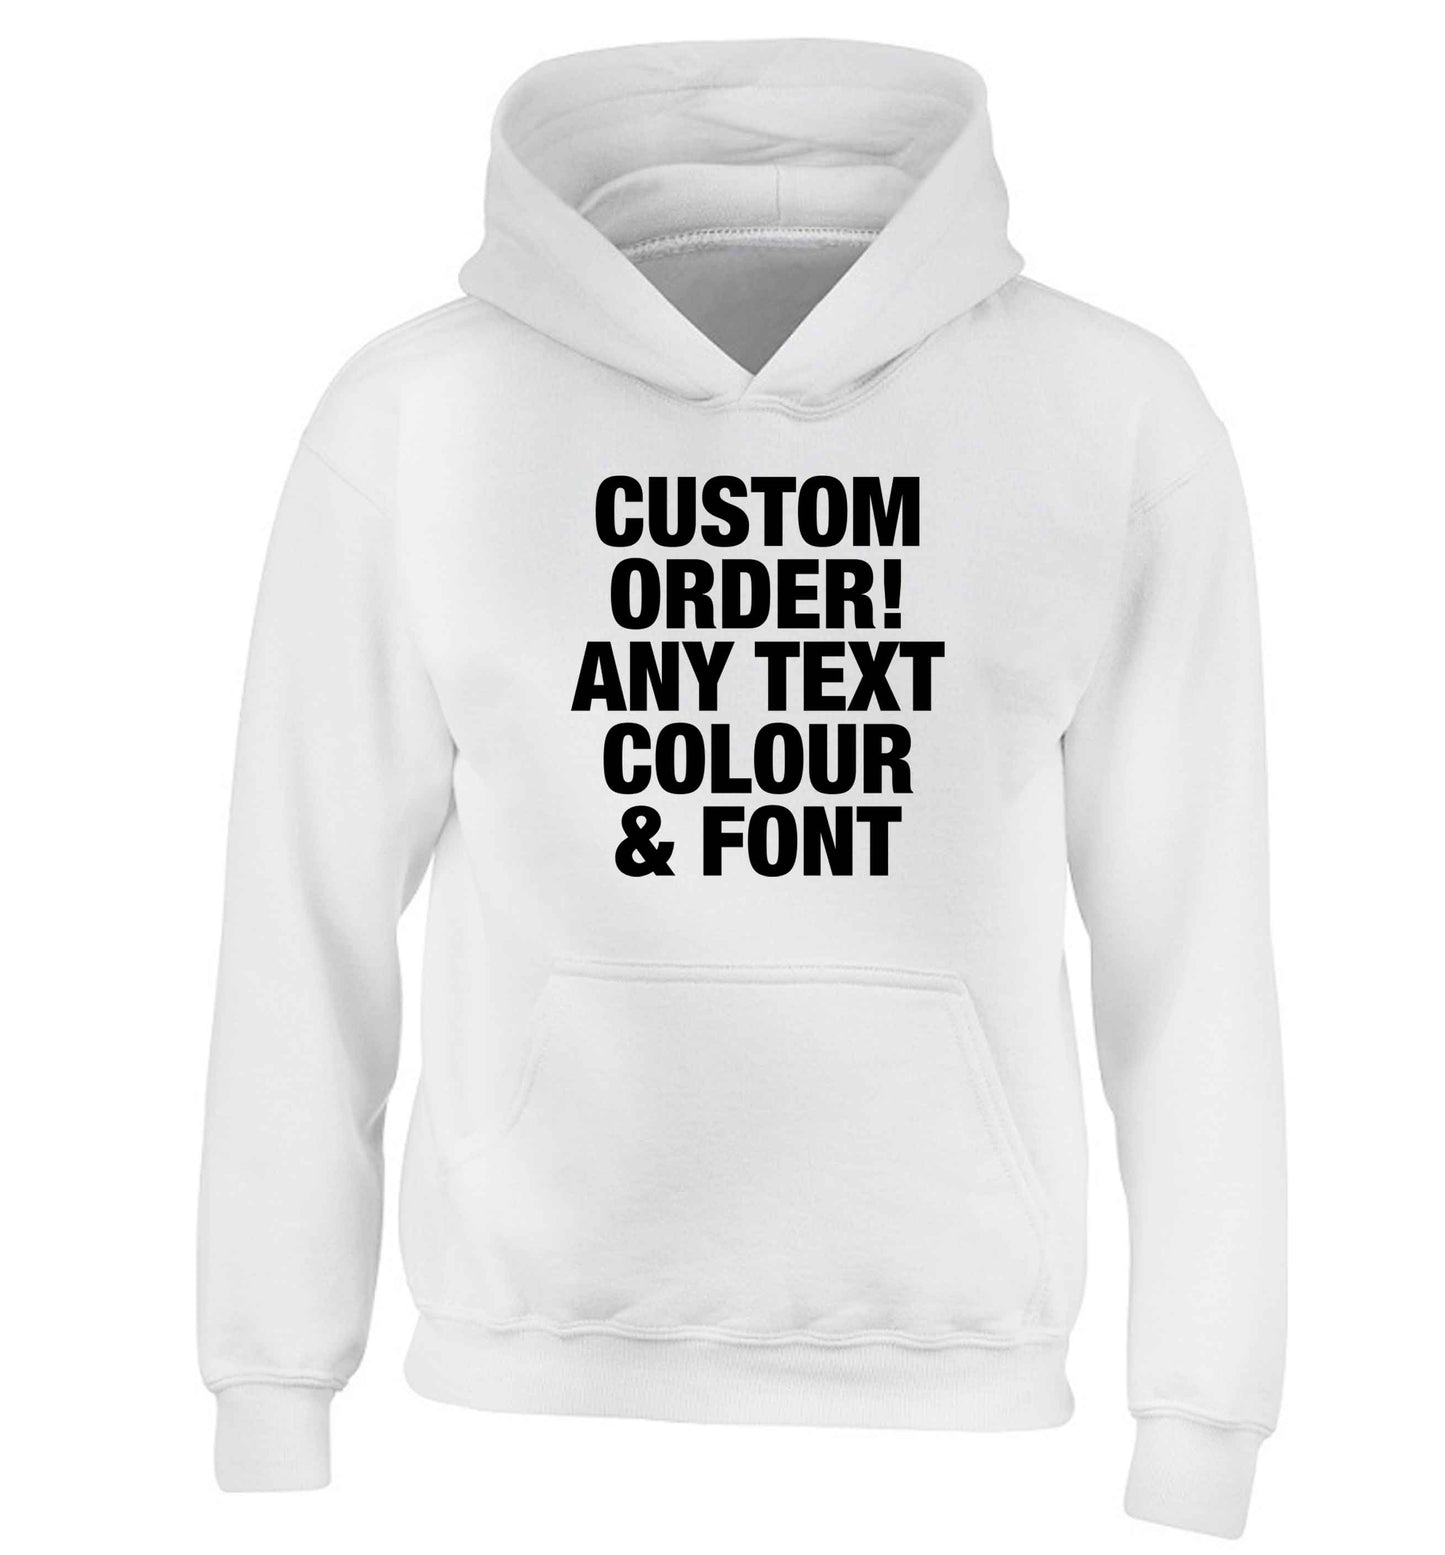 Custom order any text colour and font children's white hoodie 12-13 Years